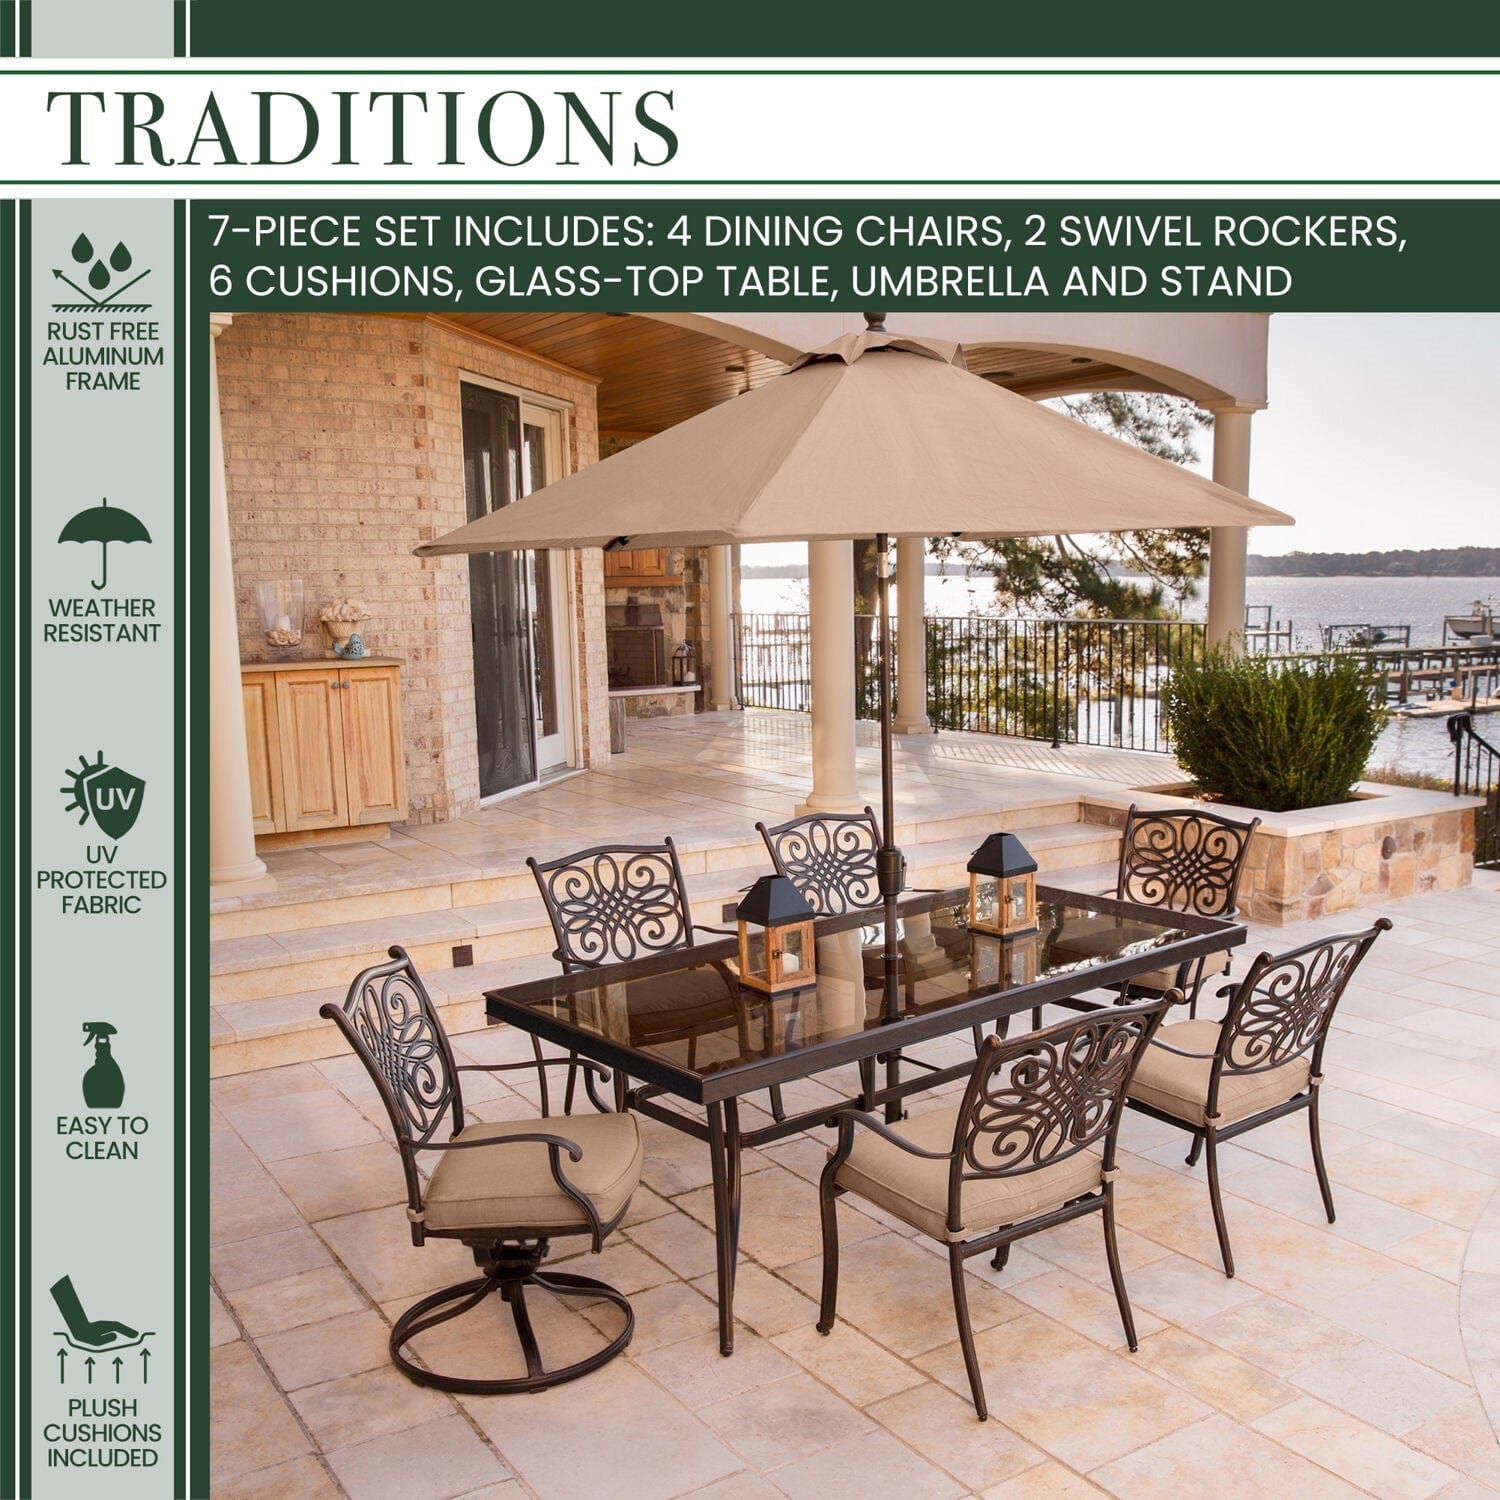 Hanover Outdoor Dining Set Hanover - Traditions 7-Piece Aluminium Frame Dining Set in Tan with Extra Large Glass-Top Dining Table, 11 Ft. Table Umbrella, and Umbrella Stand | TRADDN7PCSW2G-SU